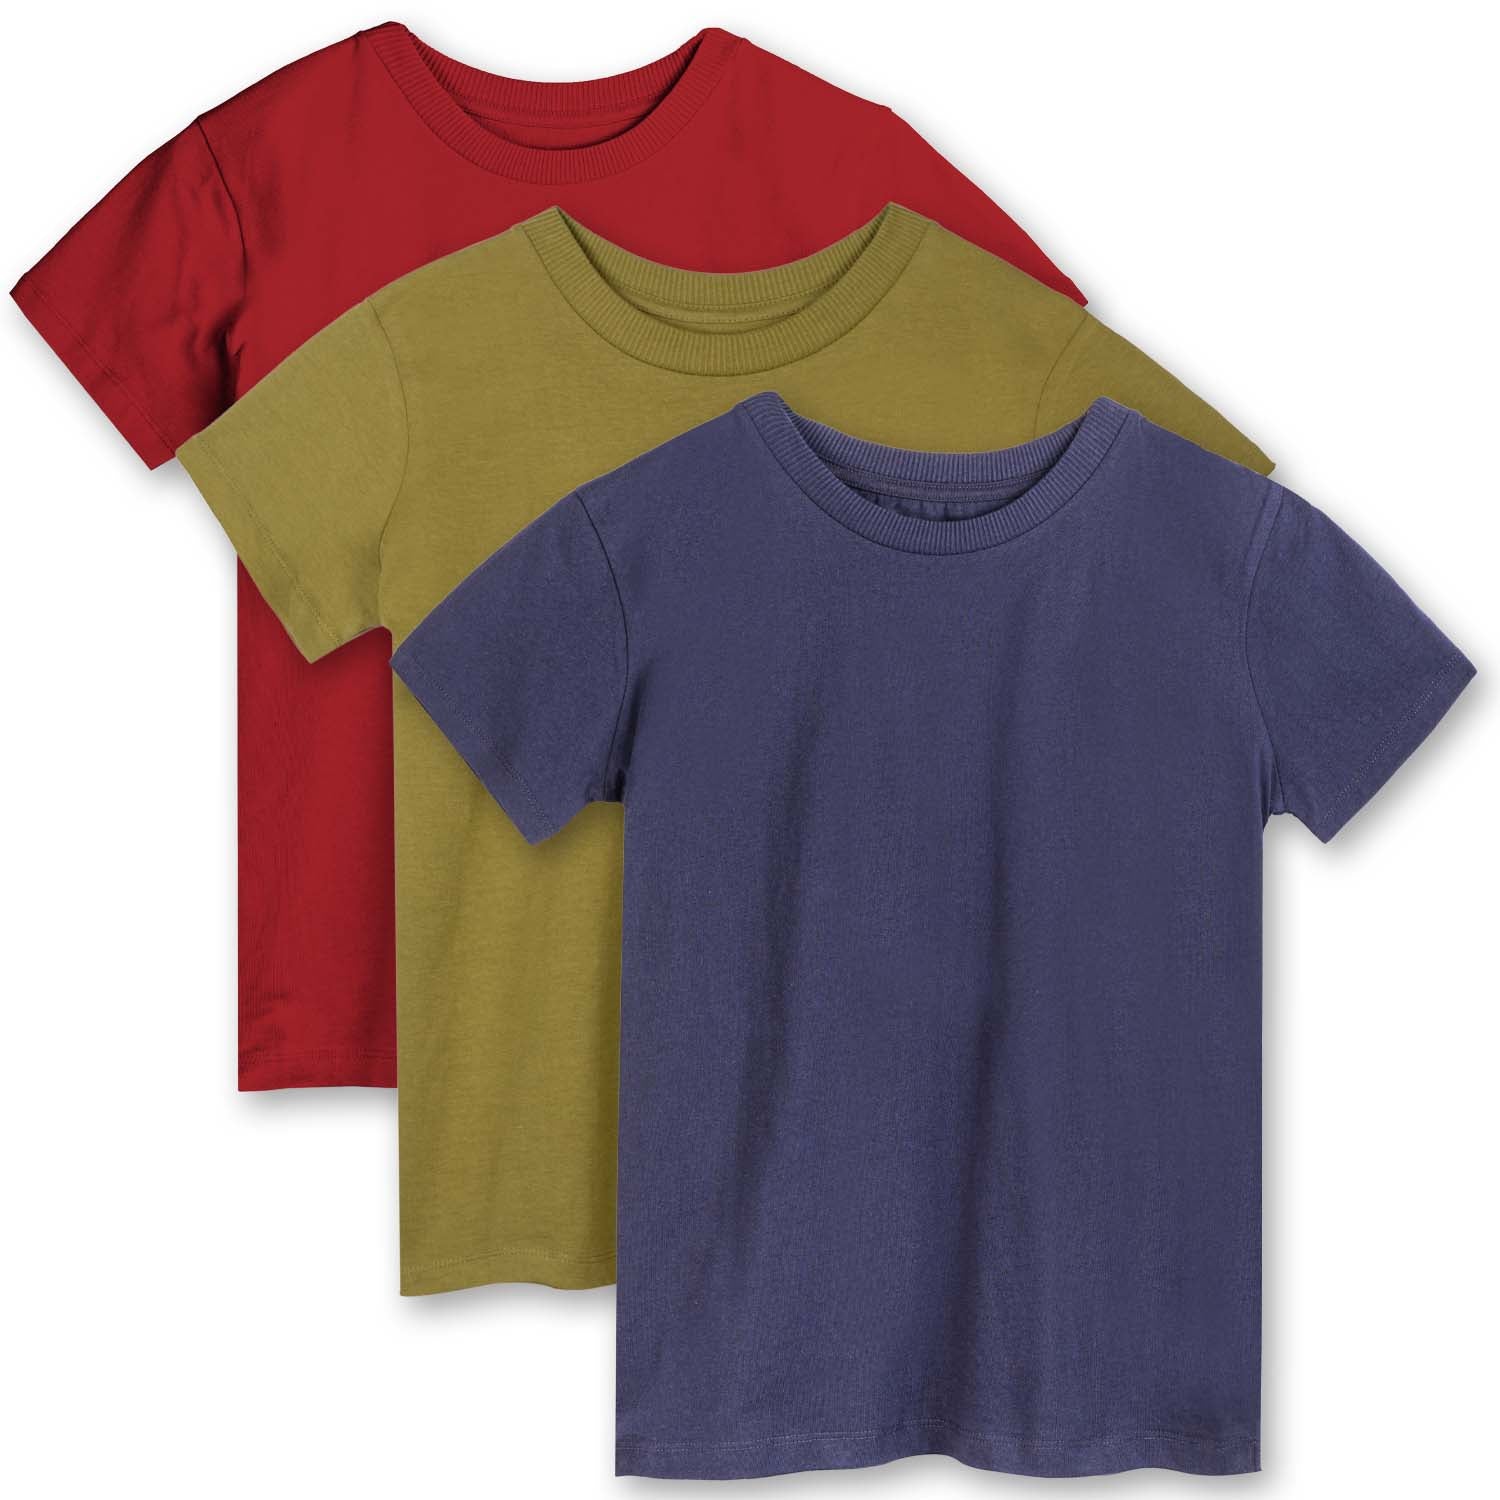 T-Shirts Kids Cotton 3 Length - Organic Shirts Pack Mightly Extended -